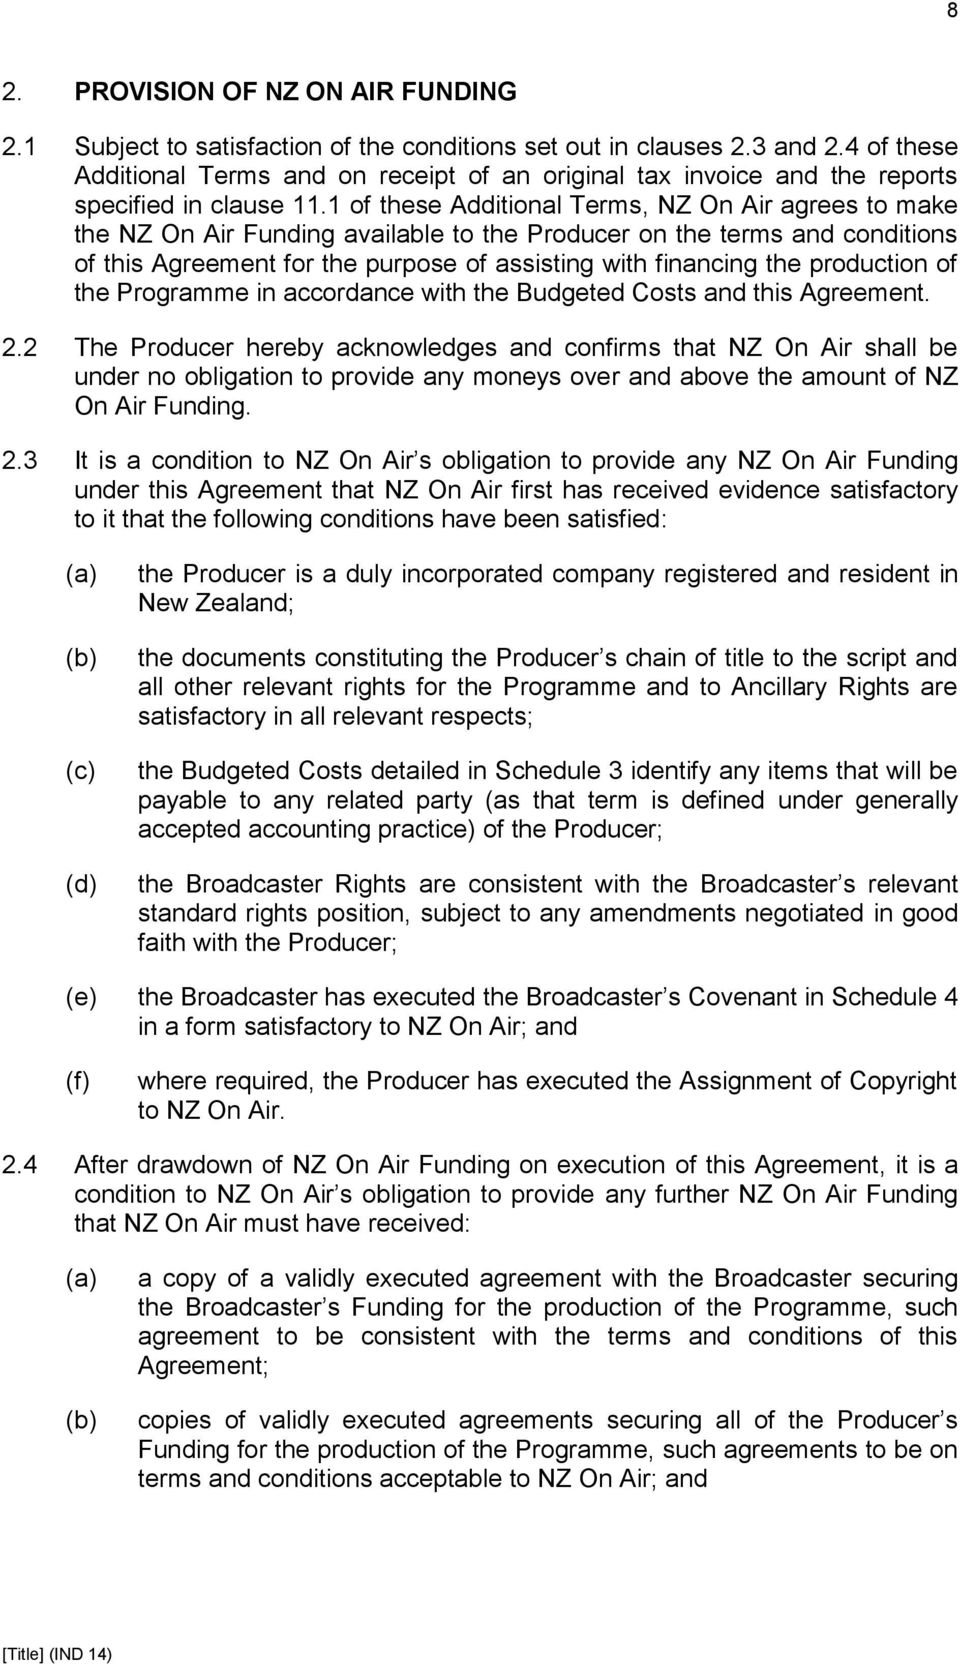 1 of these Additional Terms, NZ On Air agrees to make the NZ On Air Funding available to the Producer on the terms and conditions of this Agreement for the purpose of assisting with financing the